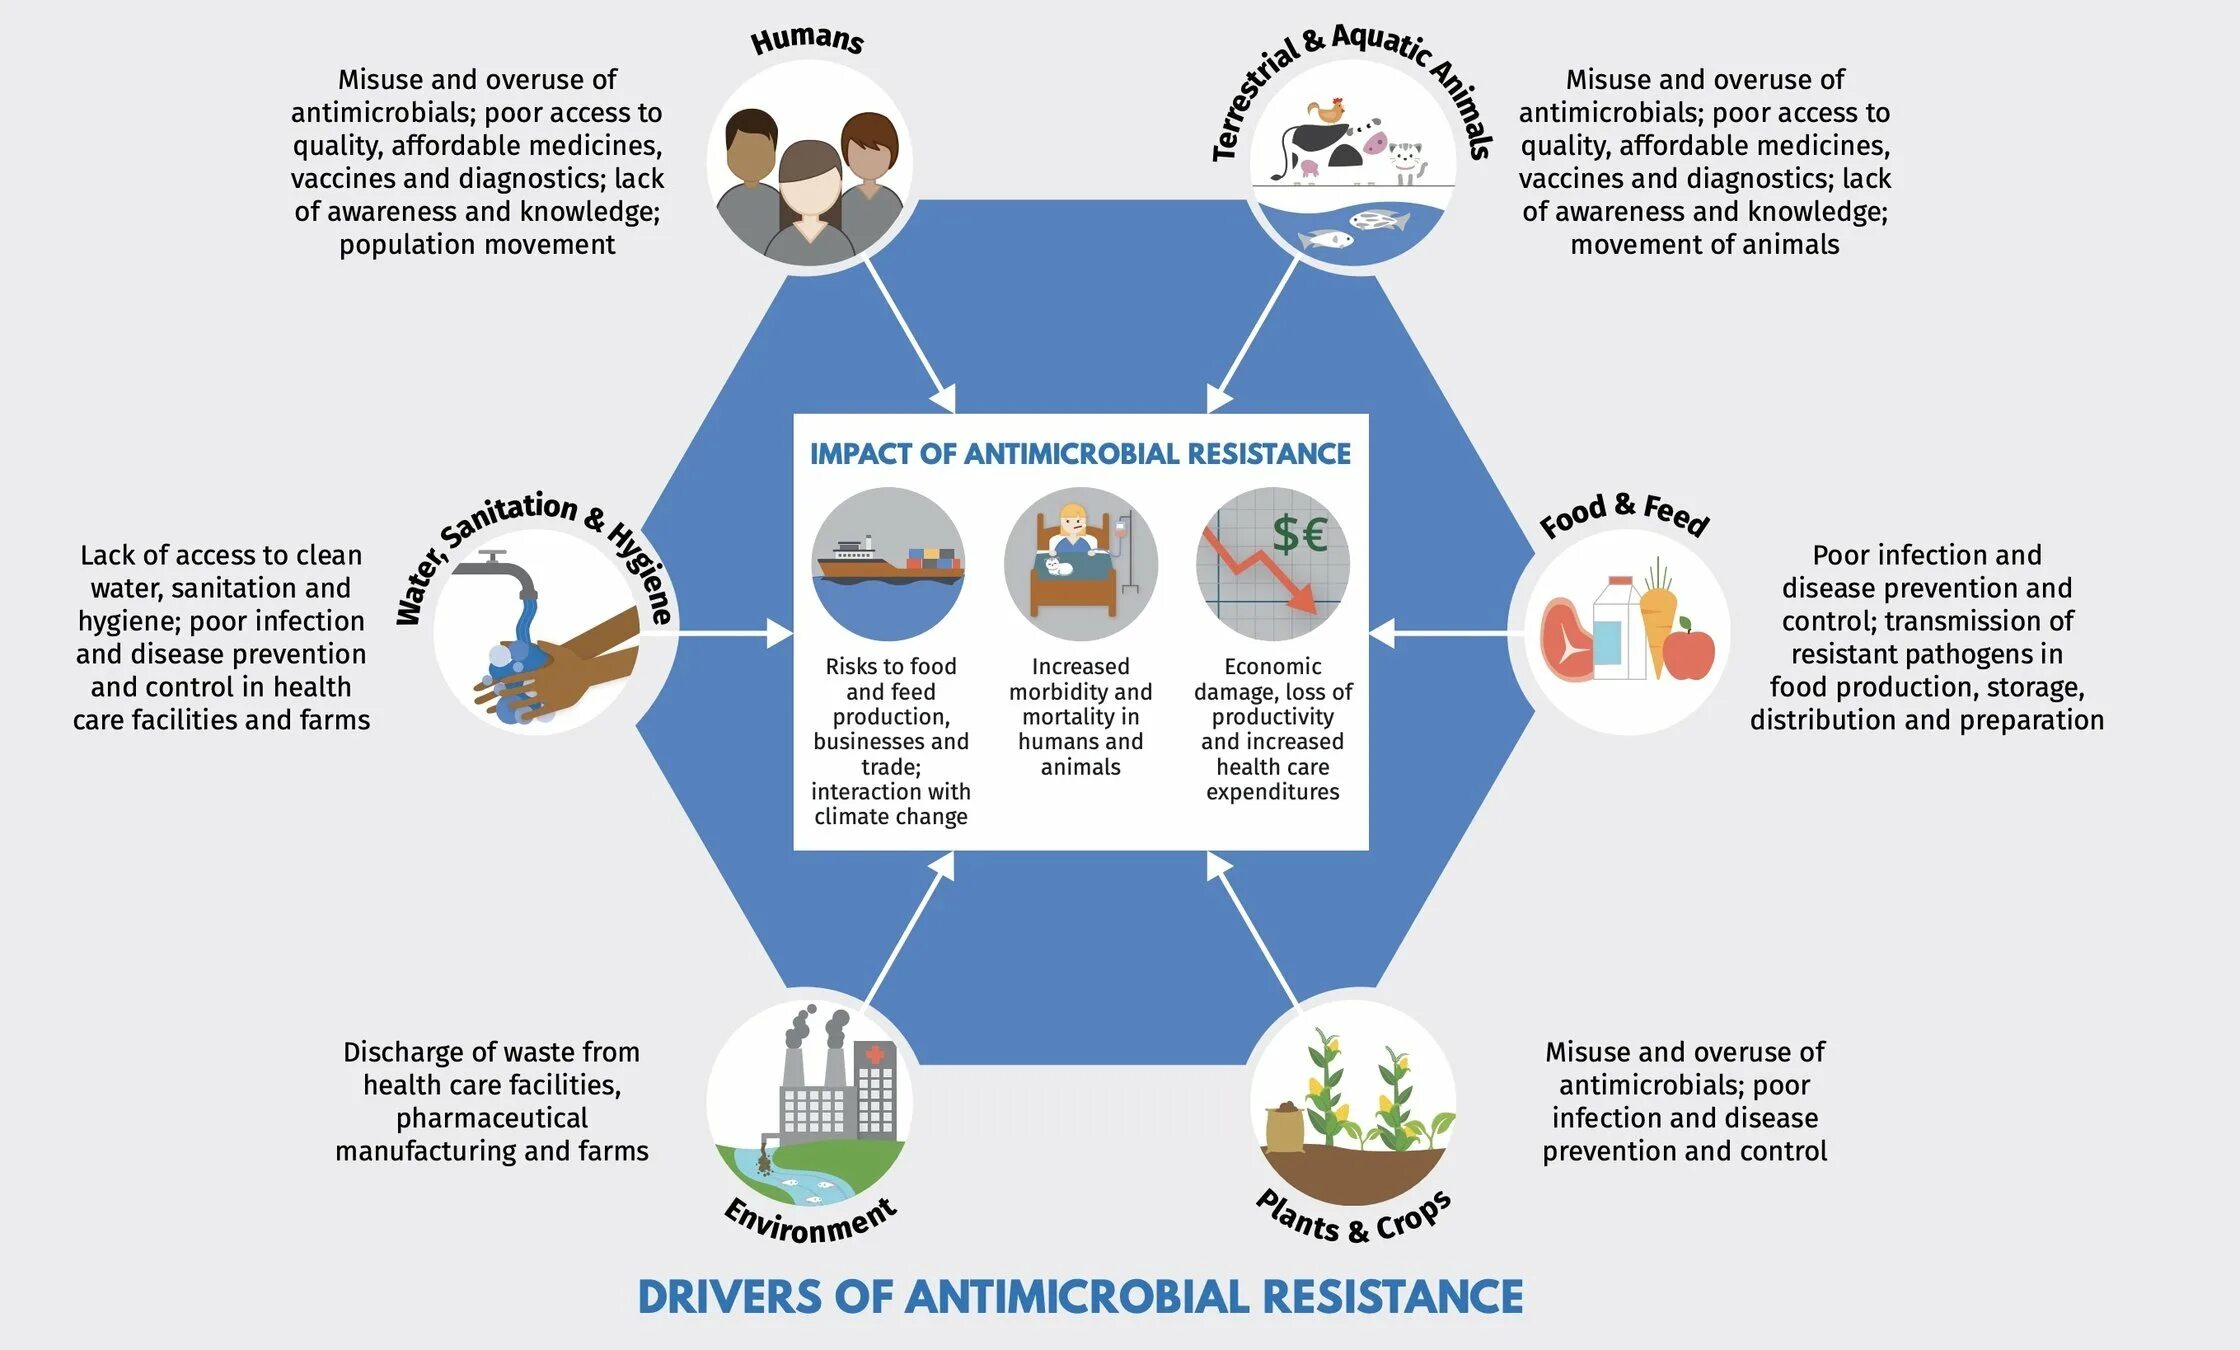 Antimicrobial Resistance. One Health. Drug-Resistant infections. Healthcare waste Management & infection Prevention and Control. Resist and disorder